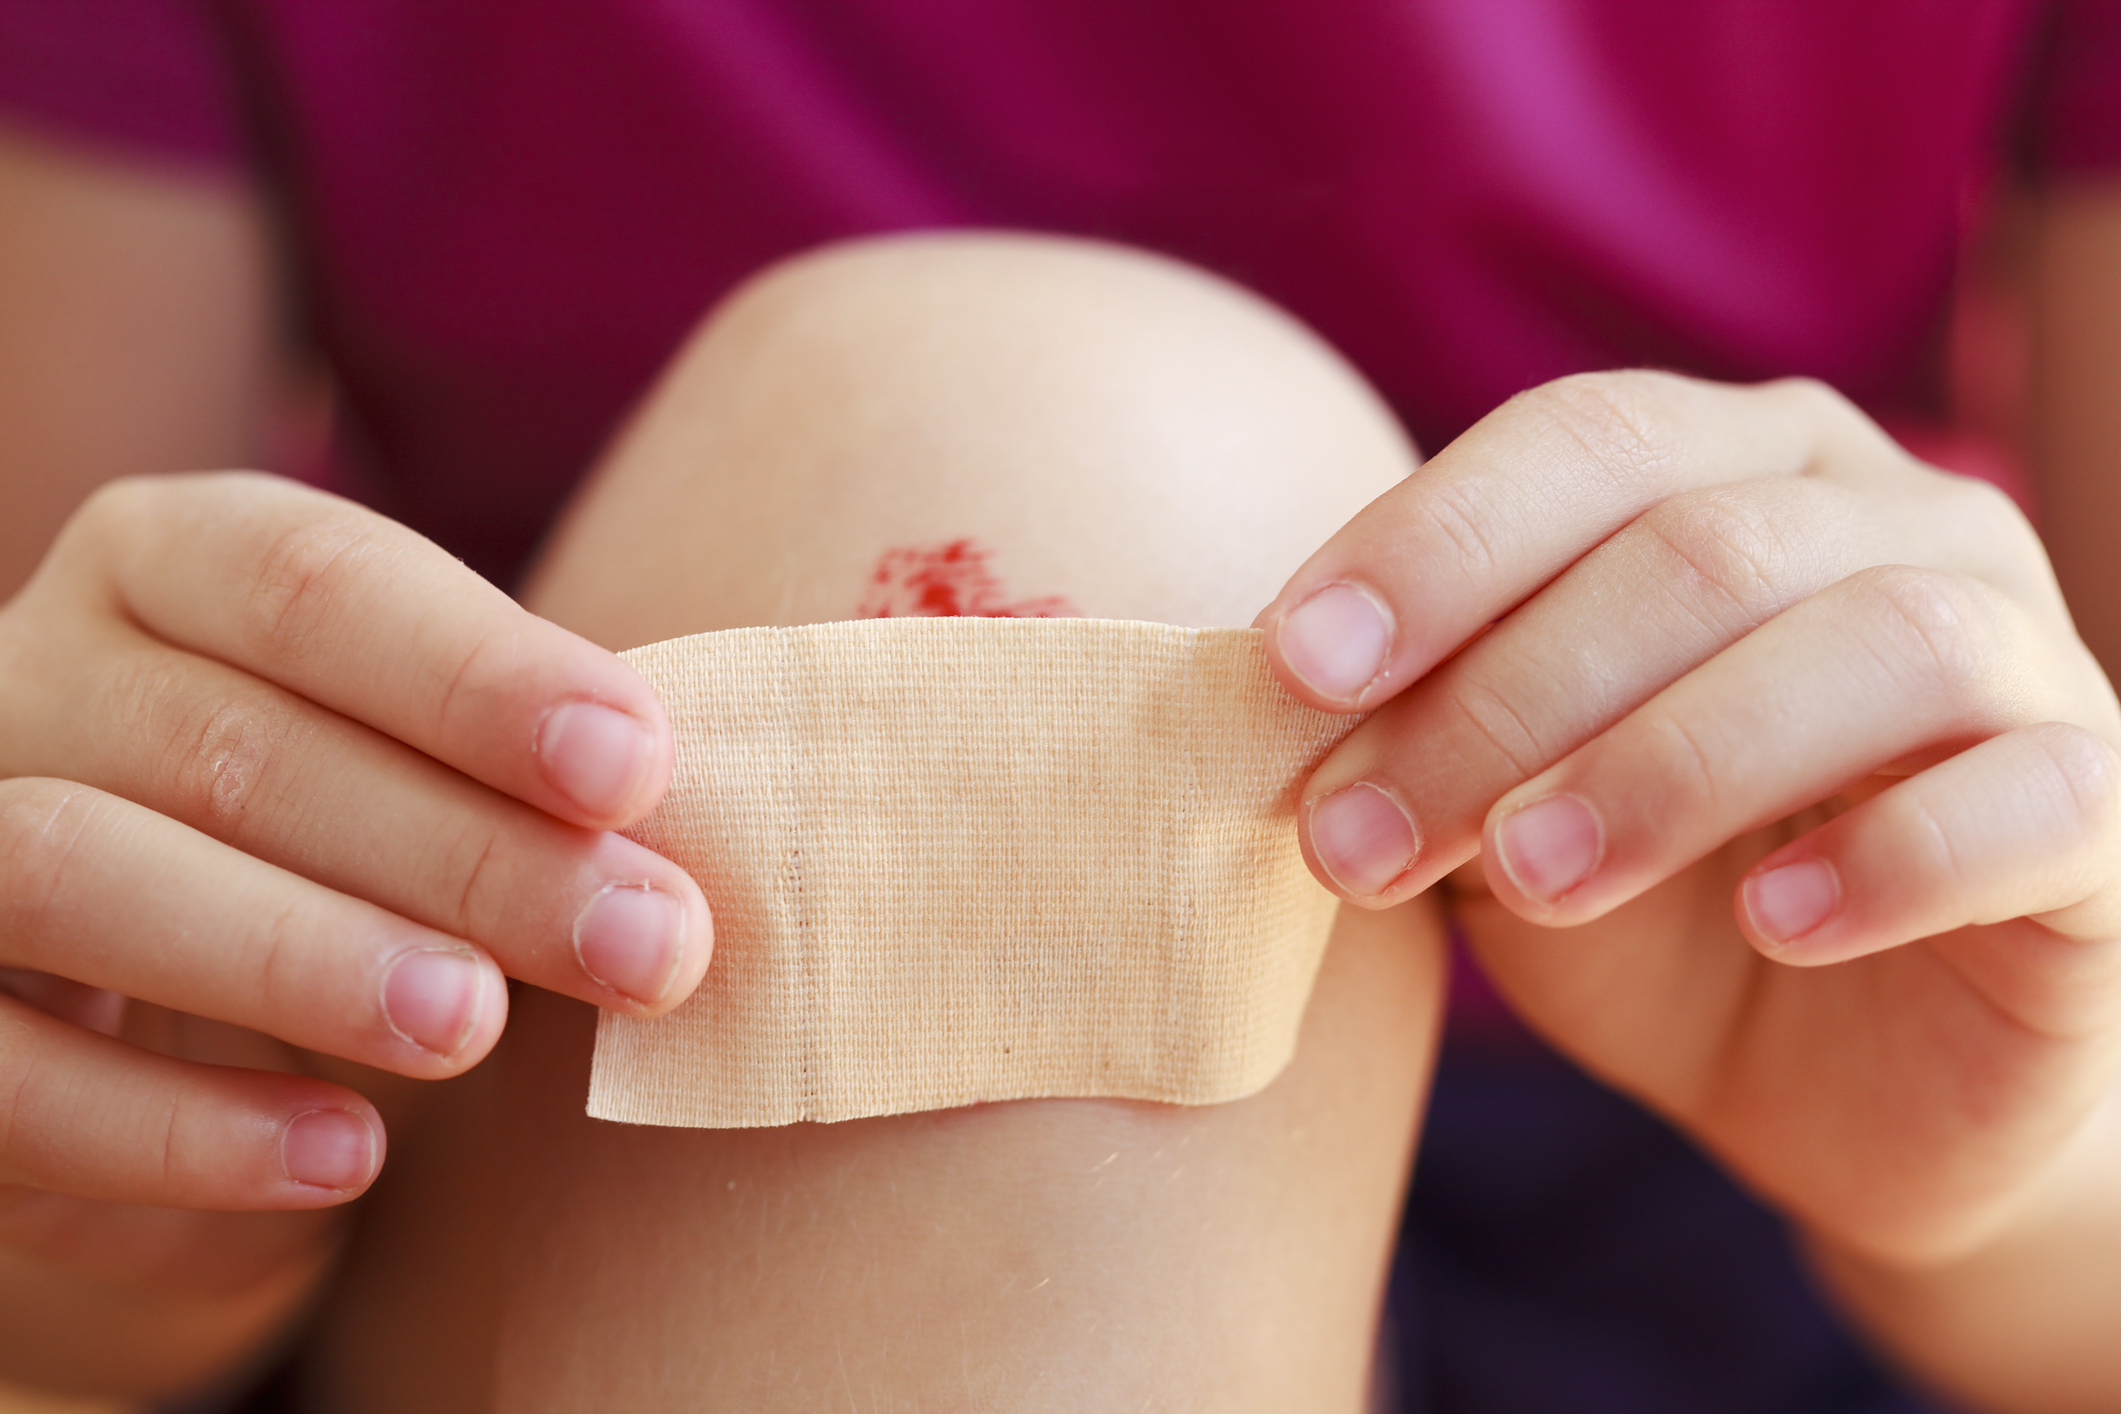 A person placing a band-aid over a scraped knee, focusing on the hands and the injured knee